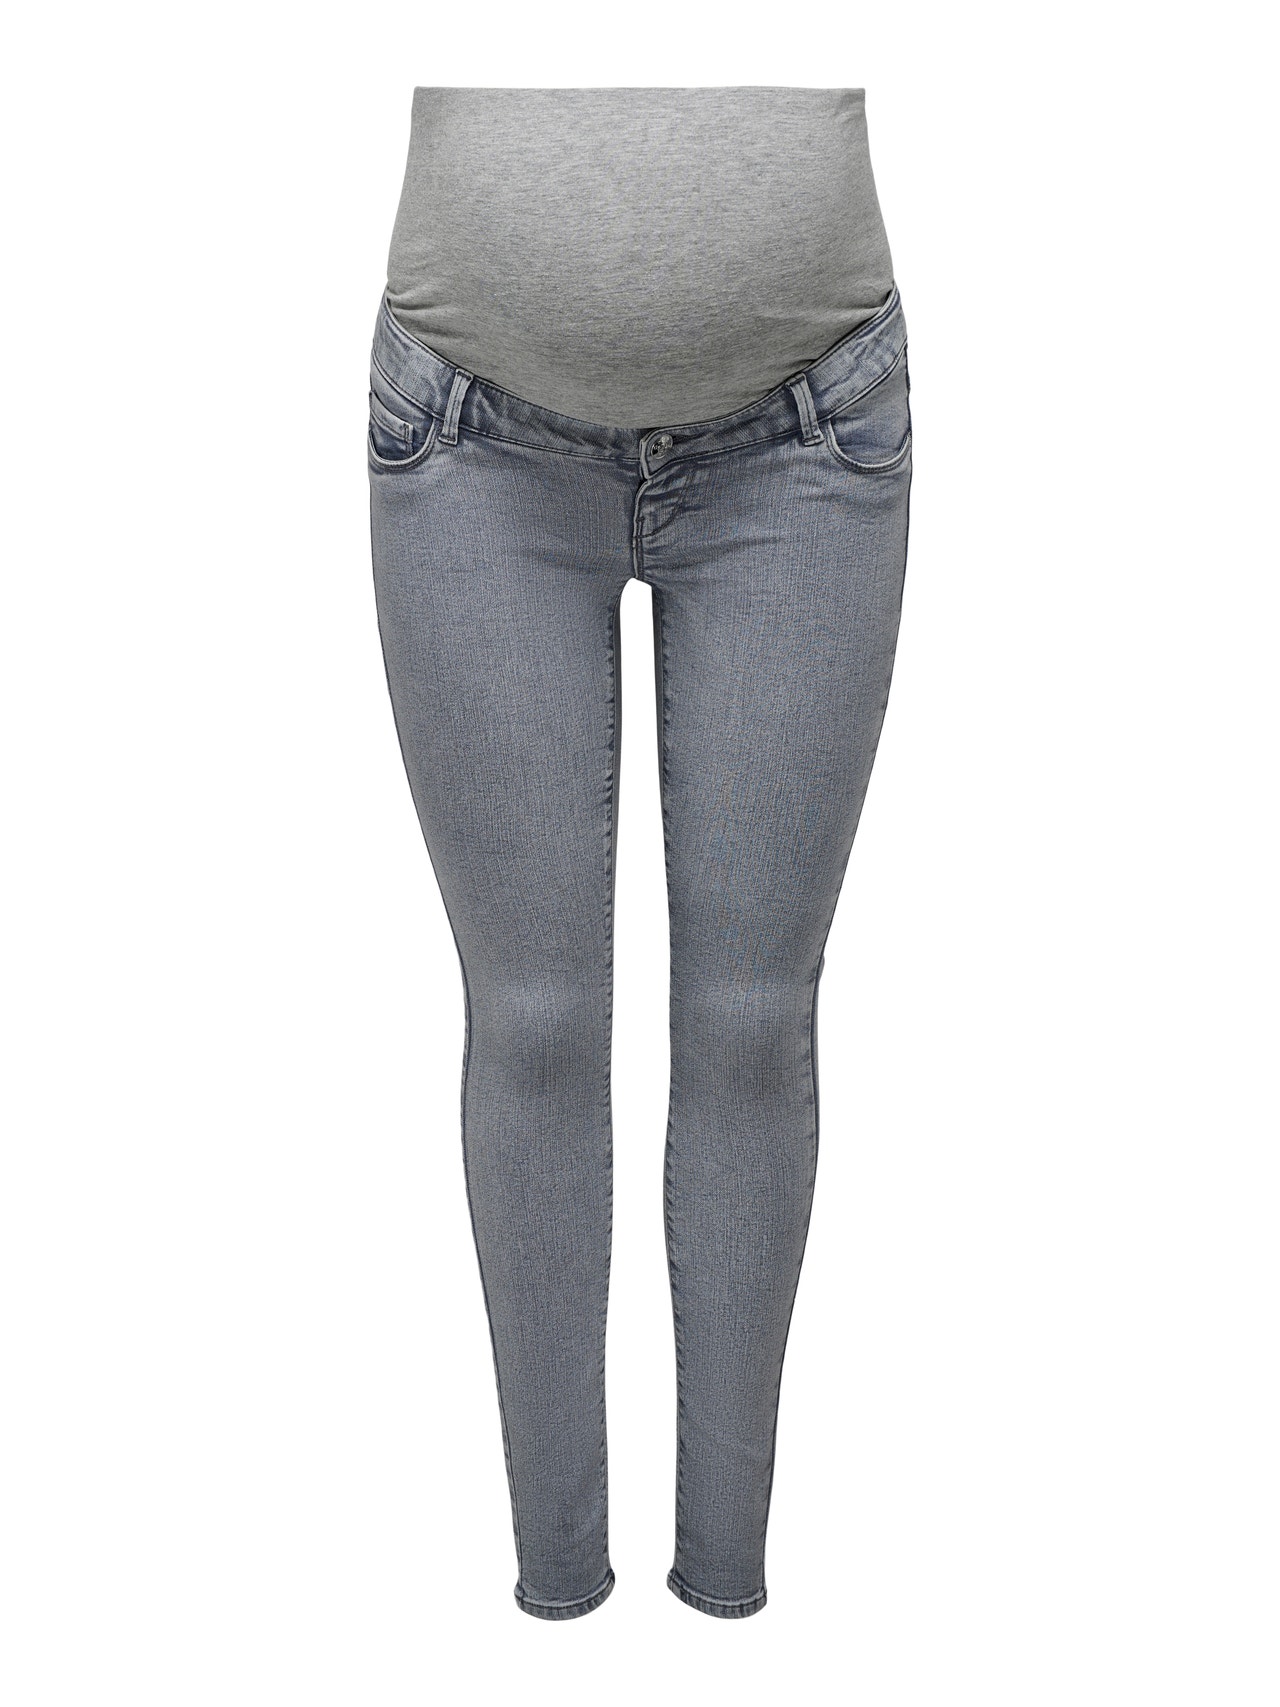 BUMP IT UP MATERNITY Blue Skinny Jeans